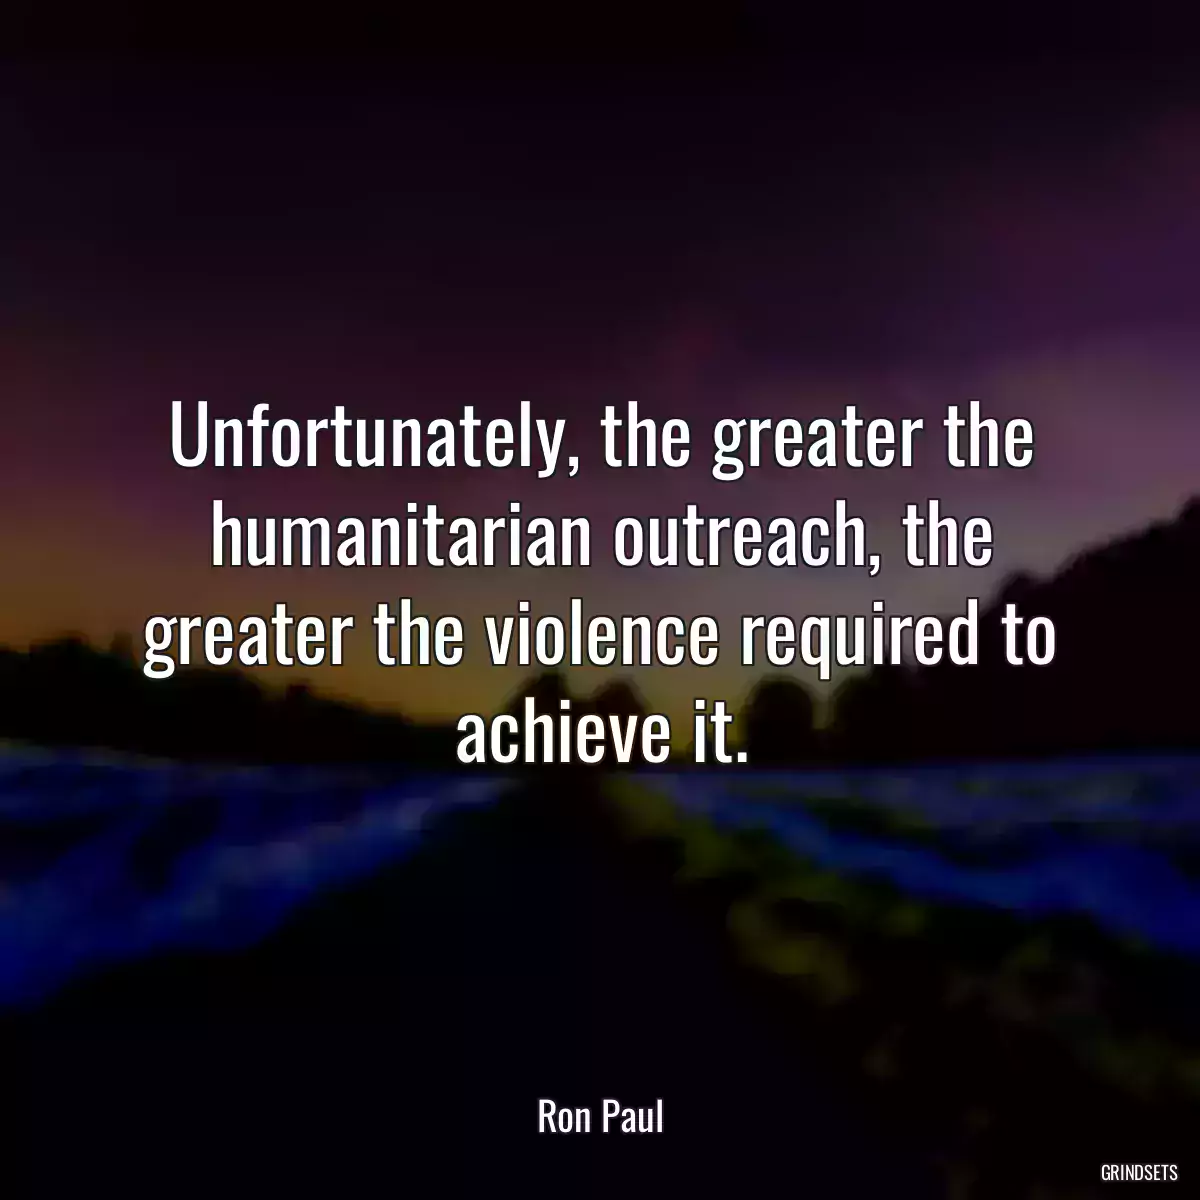 Unfortunately, the greater the humanitarian outreach, the greater the violence required to achieve it.